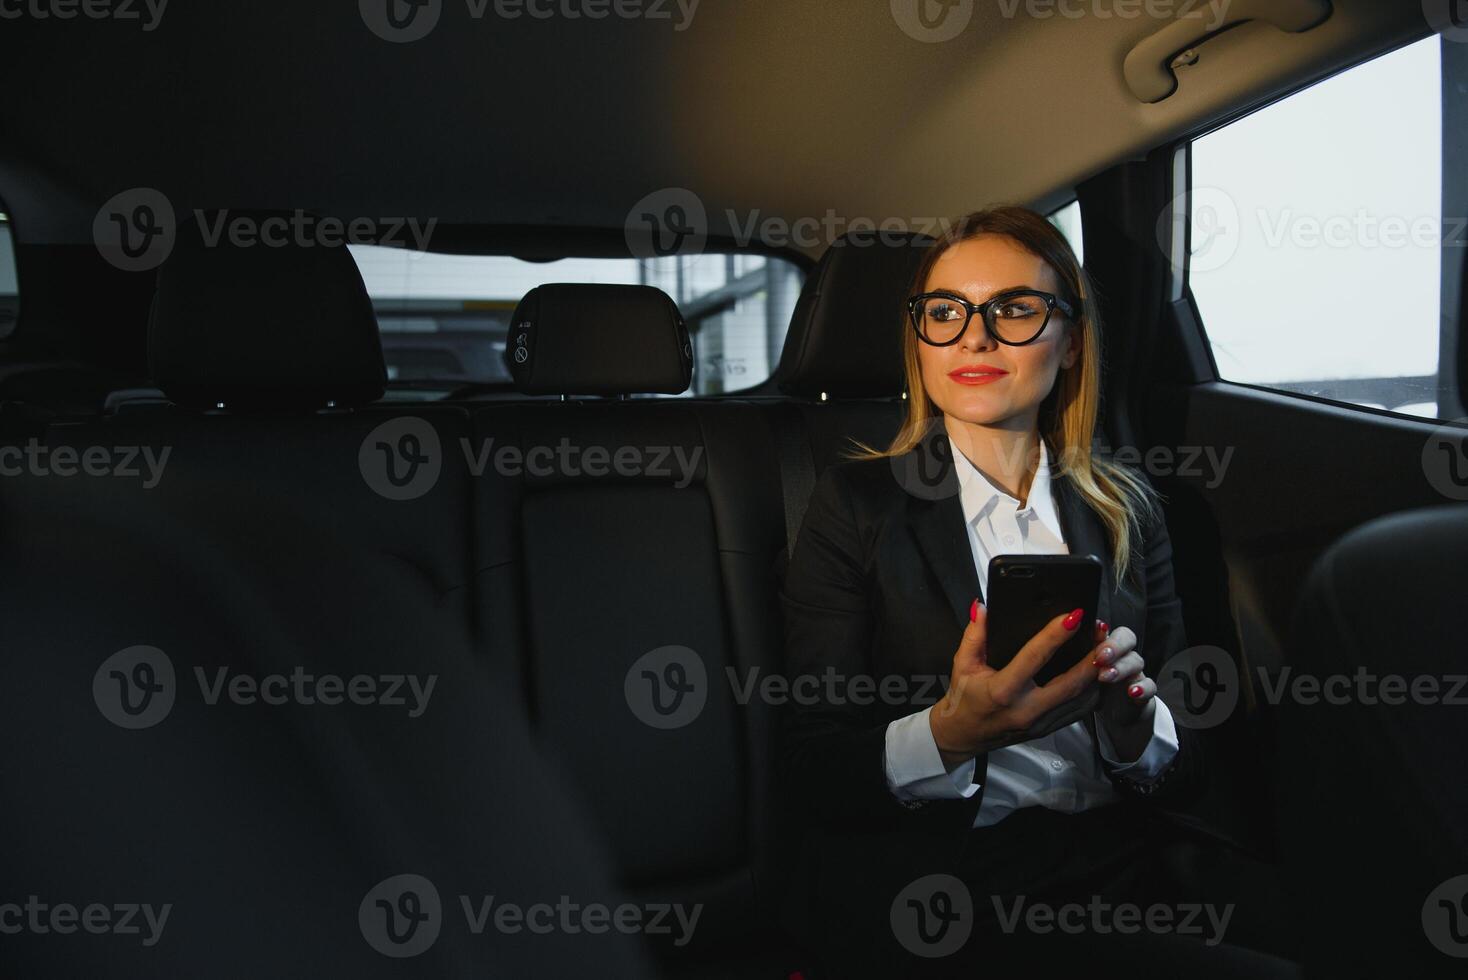 Some sort of interesting information. Smart businesswoman sits at backseat of the luxury car with black interior. photo